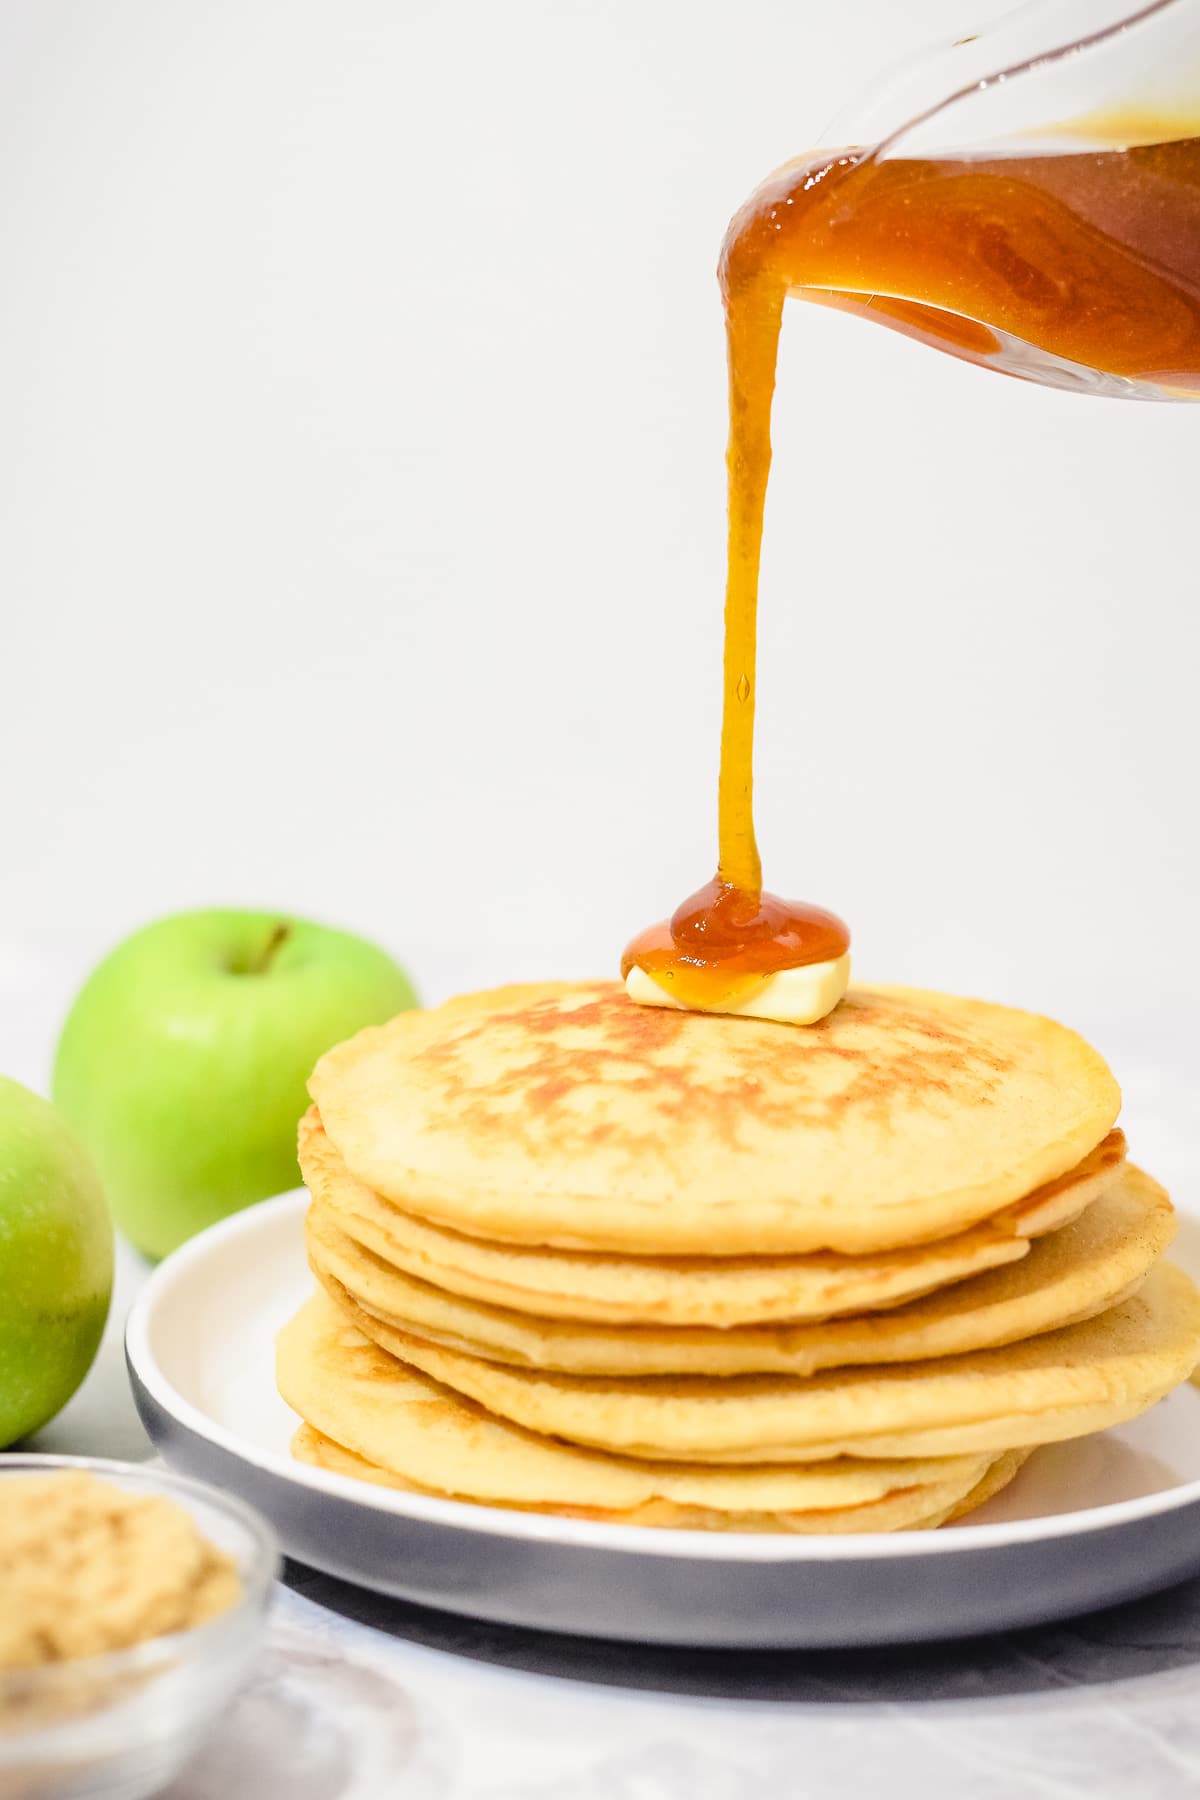 apple syrup poured from jug onto pancakes